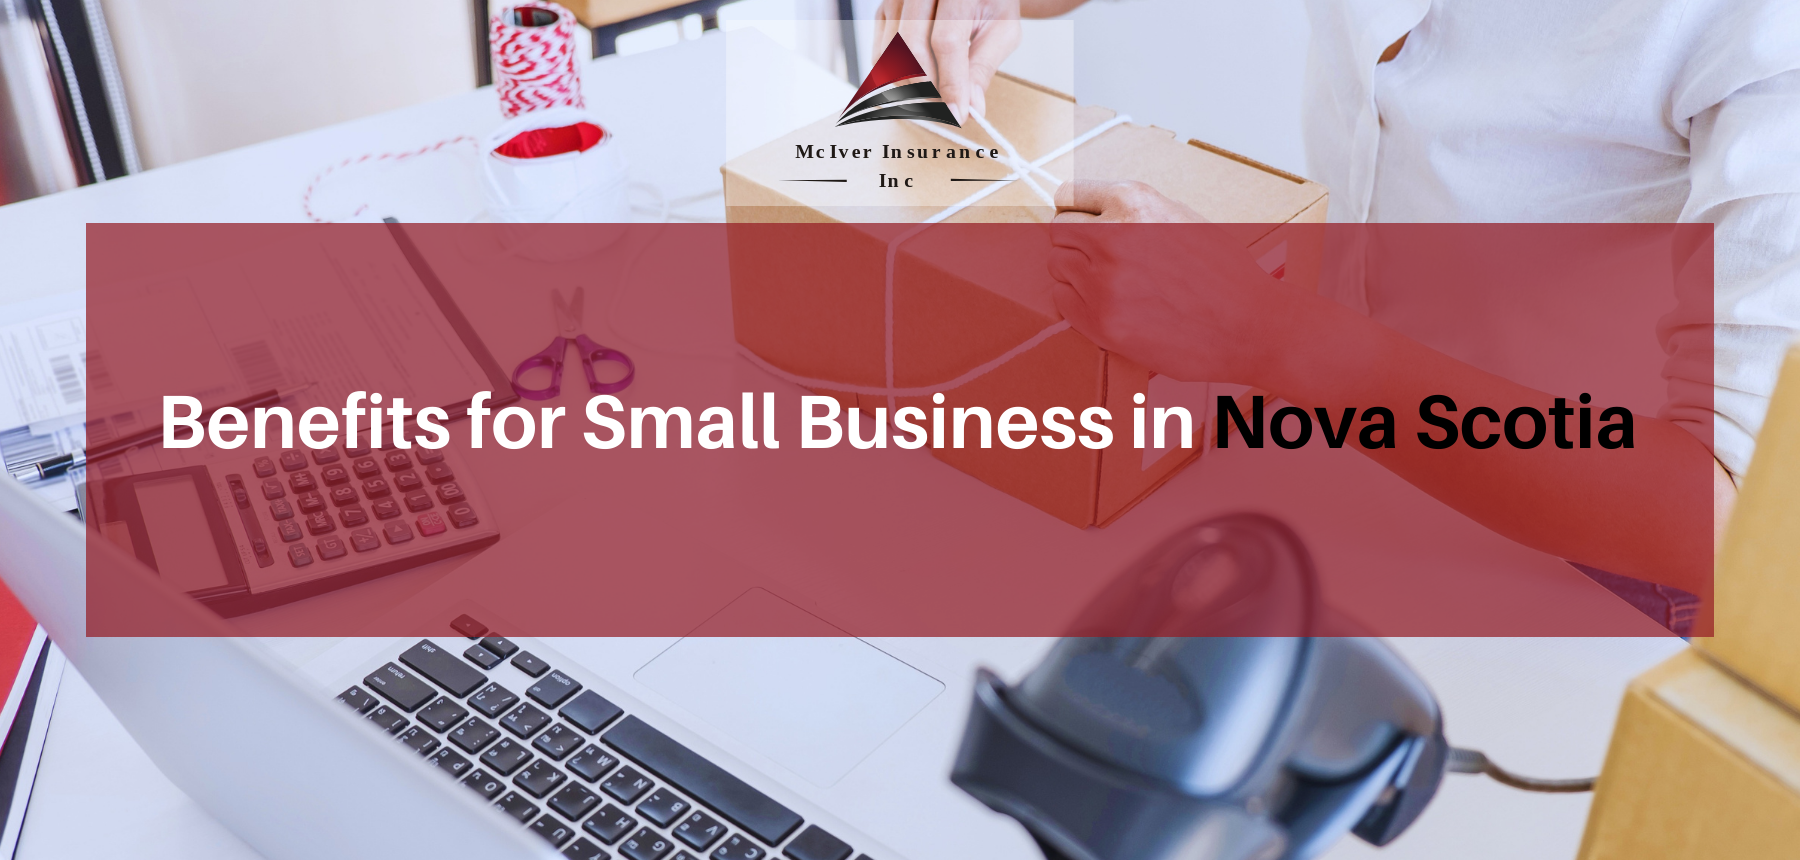 Benefits for Small Business in Nova Scotia